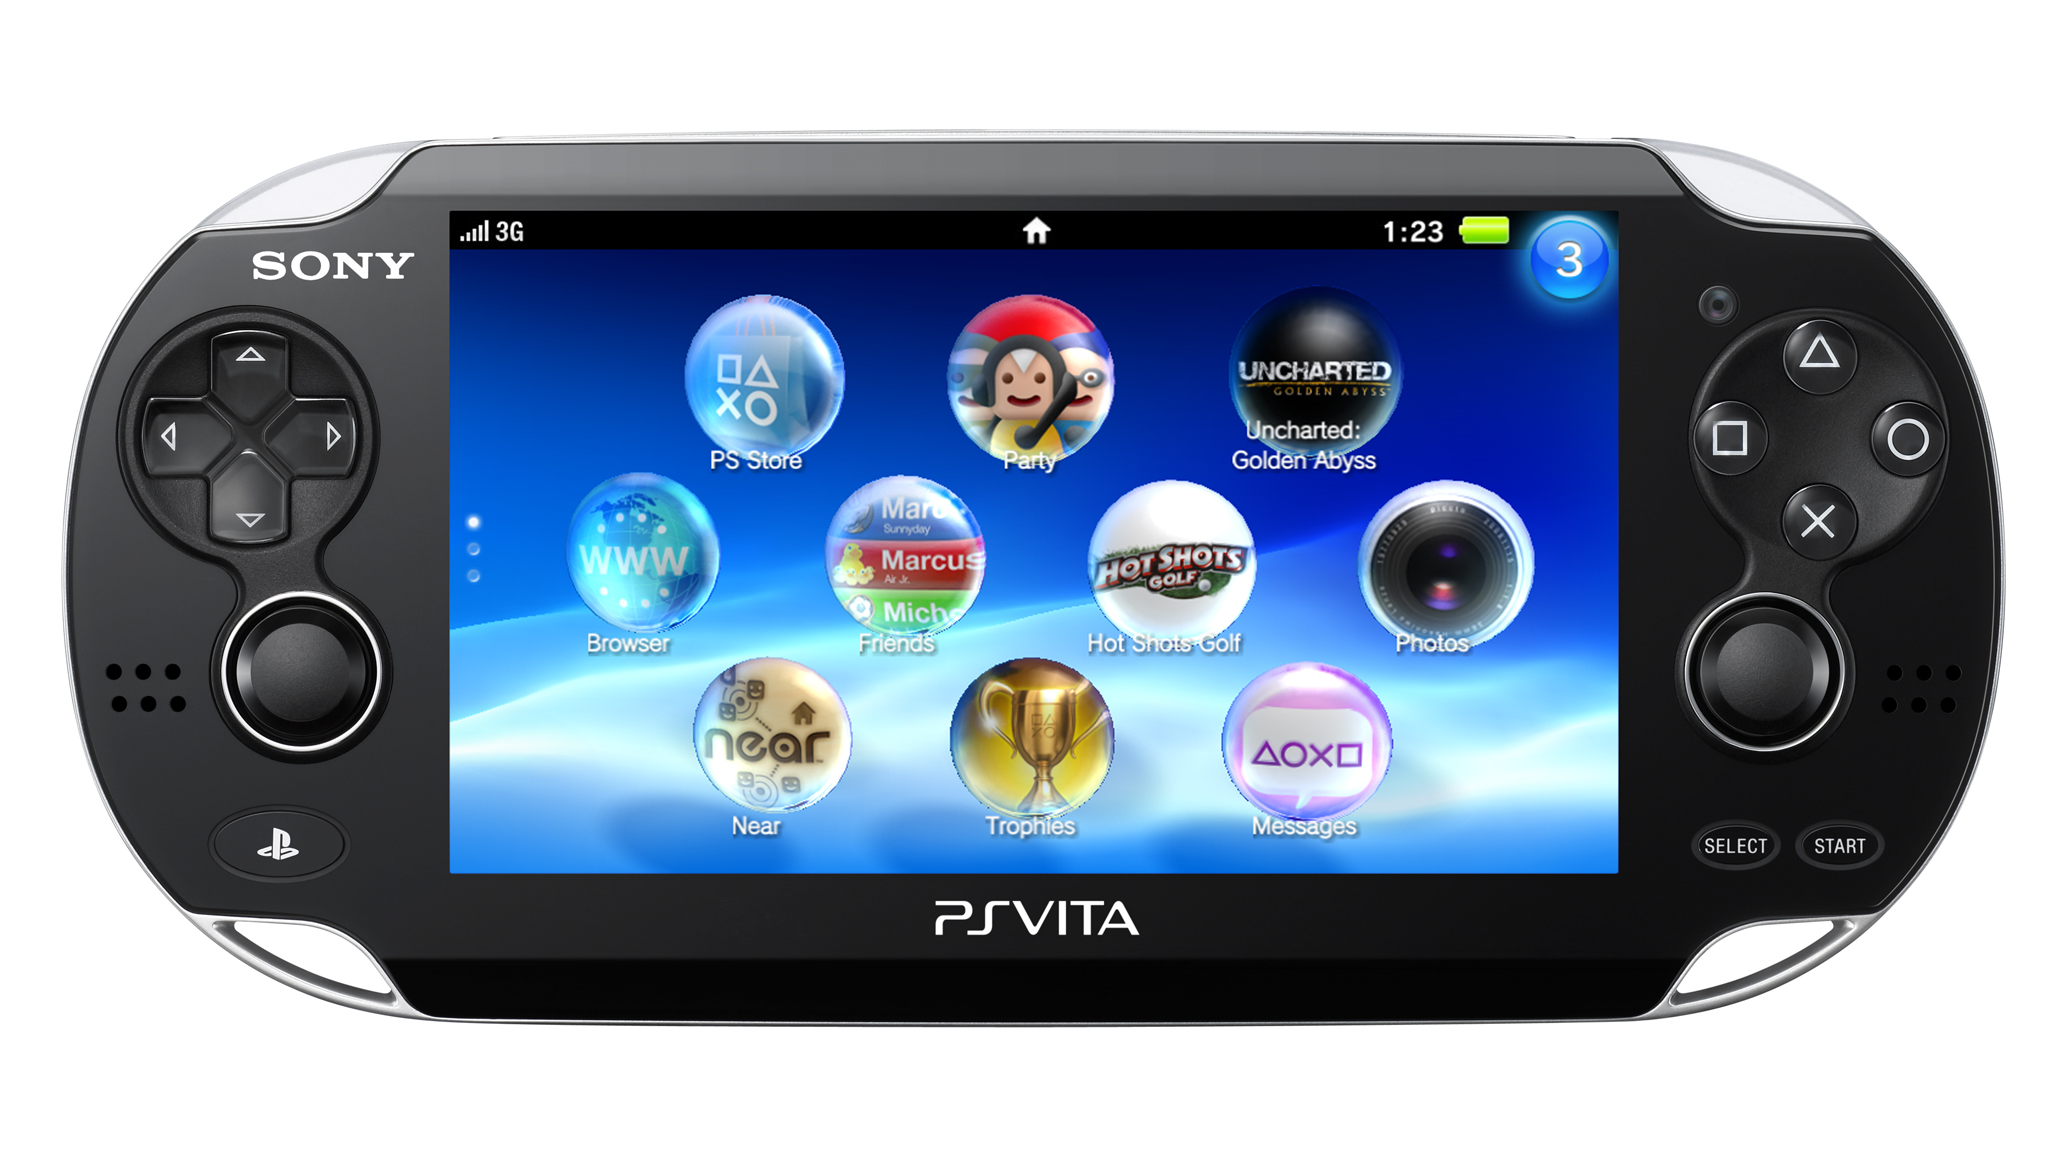 Sony Is Still Trying To Stop People From Hacking The Vita, For Some Reason